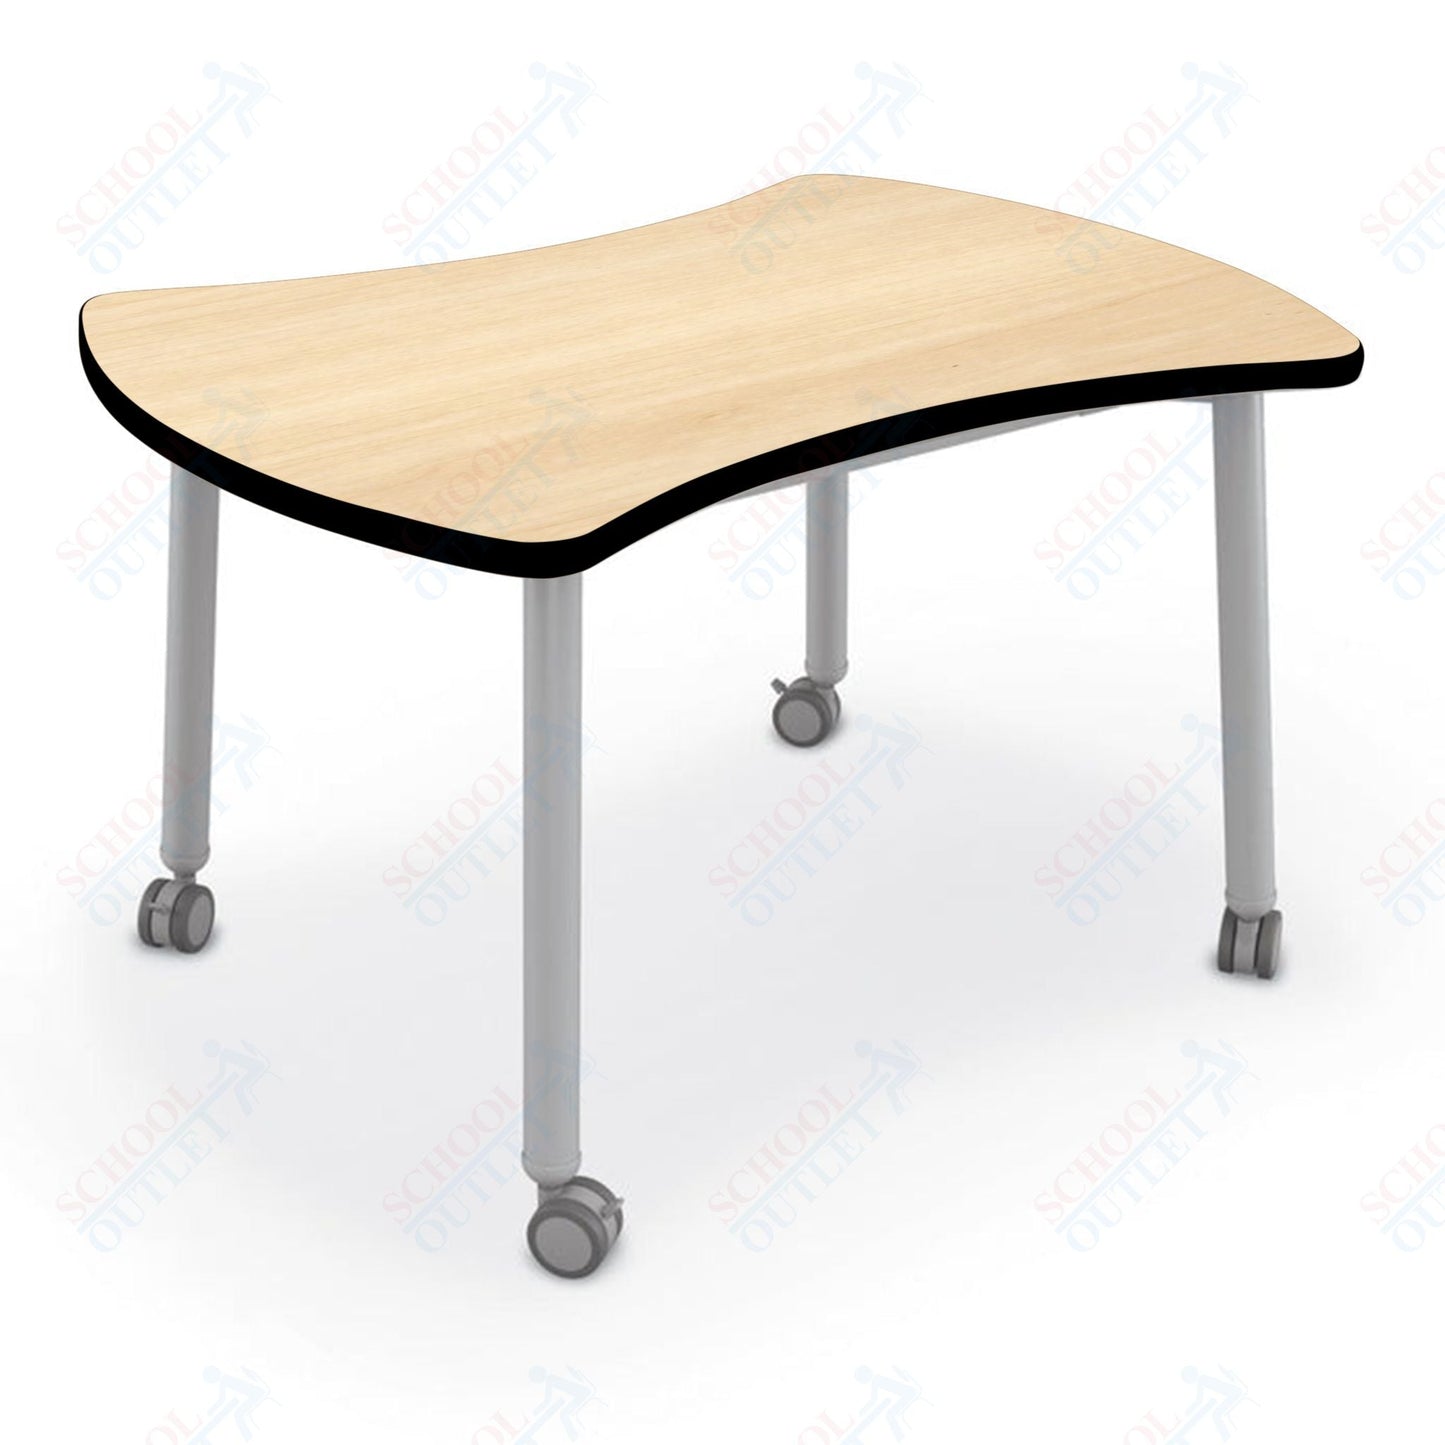 Mooreco Akt Table – Quad, Laminate Top, Fixed Height Available in 29"H, 36"H, or 42"H - SchoolOutlet